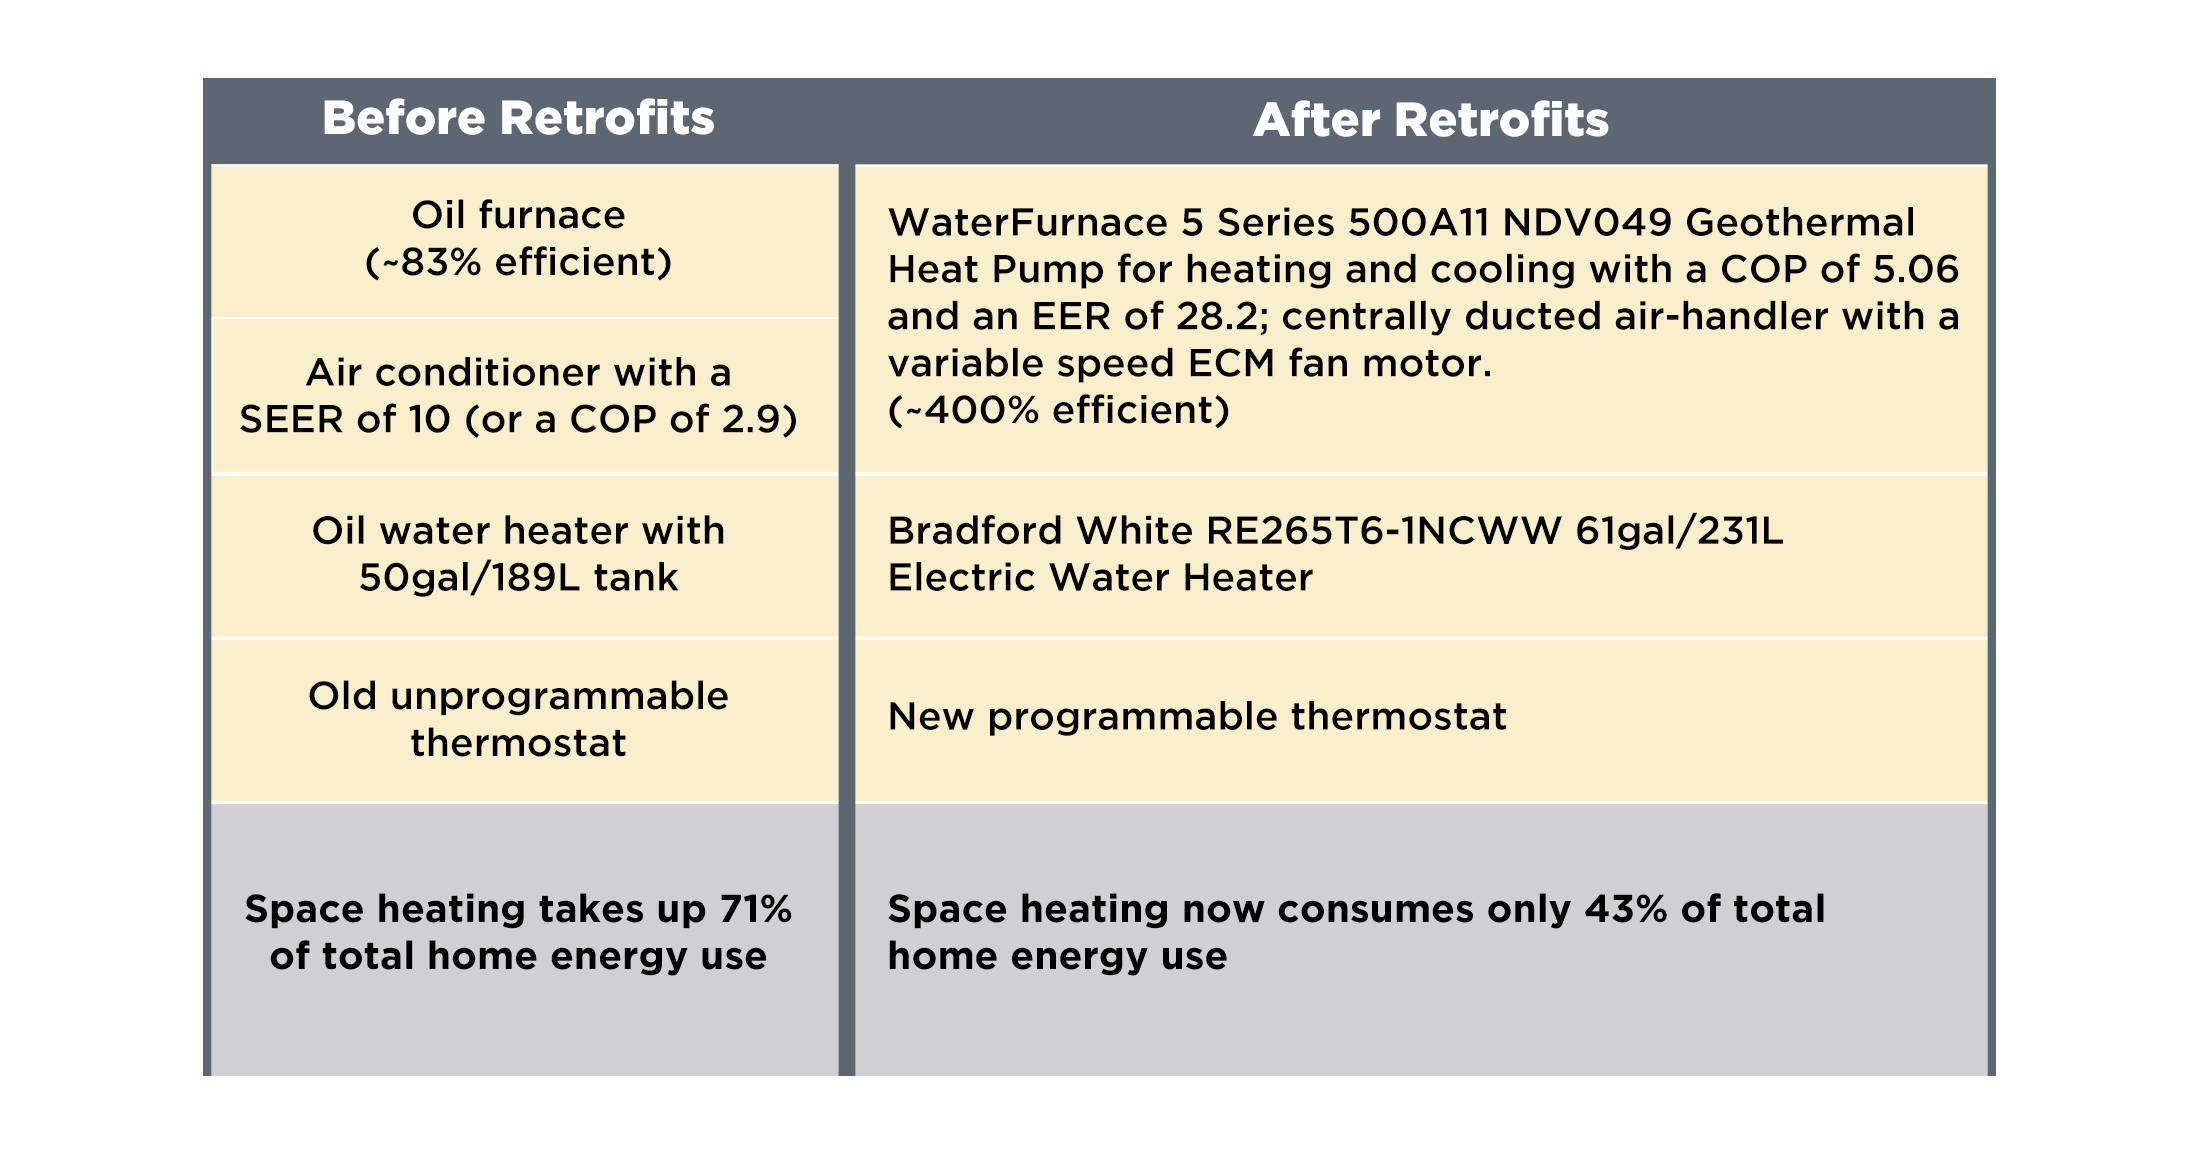 Before After Oil furnace (~83% efficient) WaterFurnace 5 Series 500A11 NDV049 Geothermal Heat Pump for heating and cooling with a COP of 5.06 and an EER of 28.2; centrally ducted air-handler with a variable speed ECM fan motor (~400% efficient) Air conditioner with a SEER of 10 (or a COP of 2.9) Oil water heater with 50gal/189L tank Bradford White RE265T6-1NCWW 61gal/231L Electric Water Heater Space heating takes up 71% of total home energy use Space heating now consumes only 43% of total home energy use